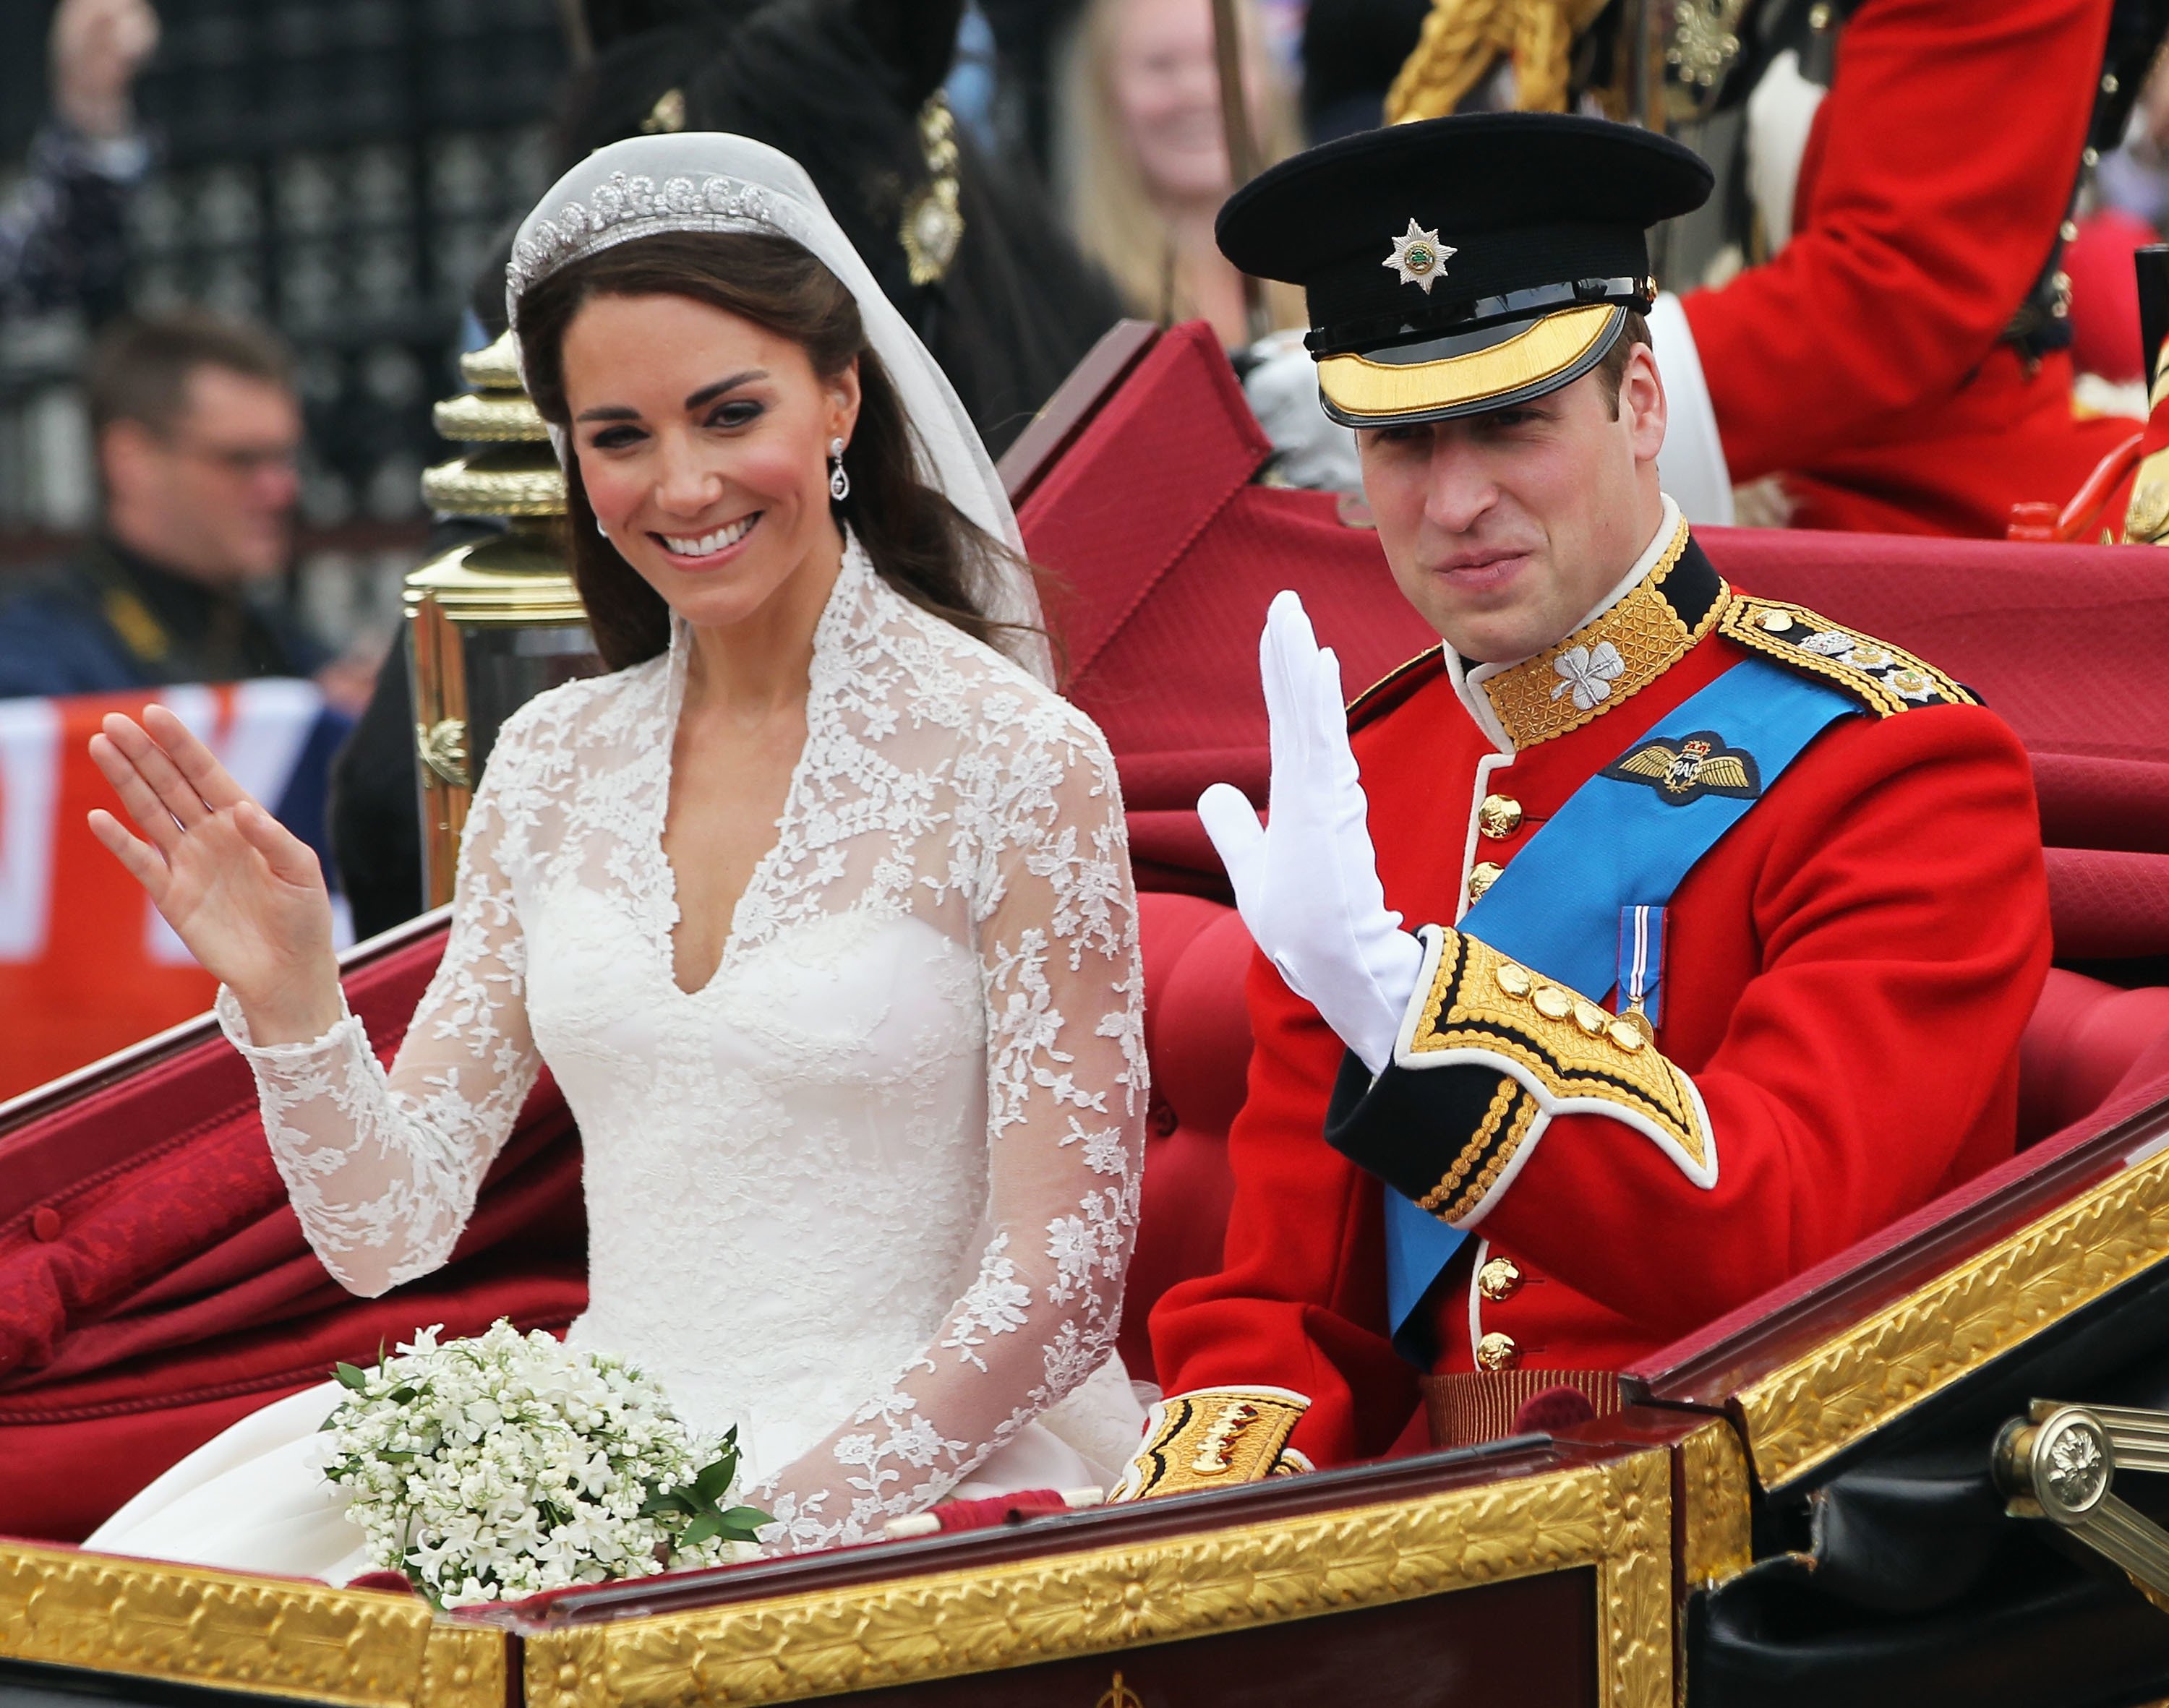 Prince William and Kate Middleton journey by carriage procession to Buckingham Palace following their marriage at Westminster Abbey on April 29, 2011 in London, England | Photo: Getty Images